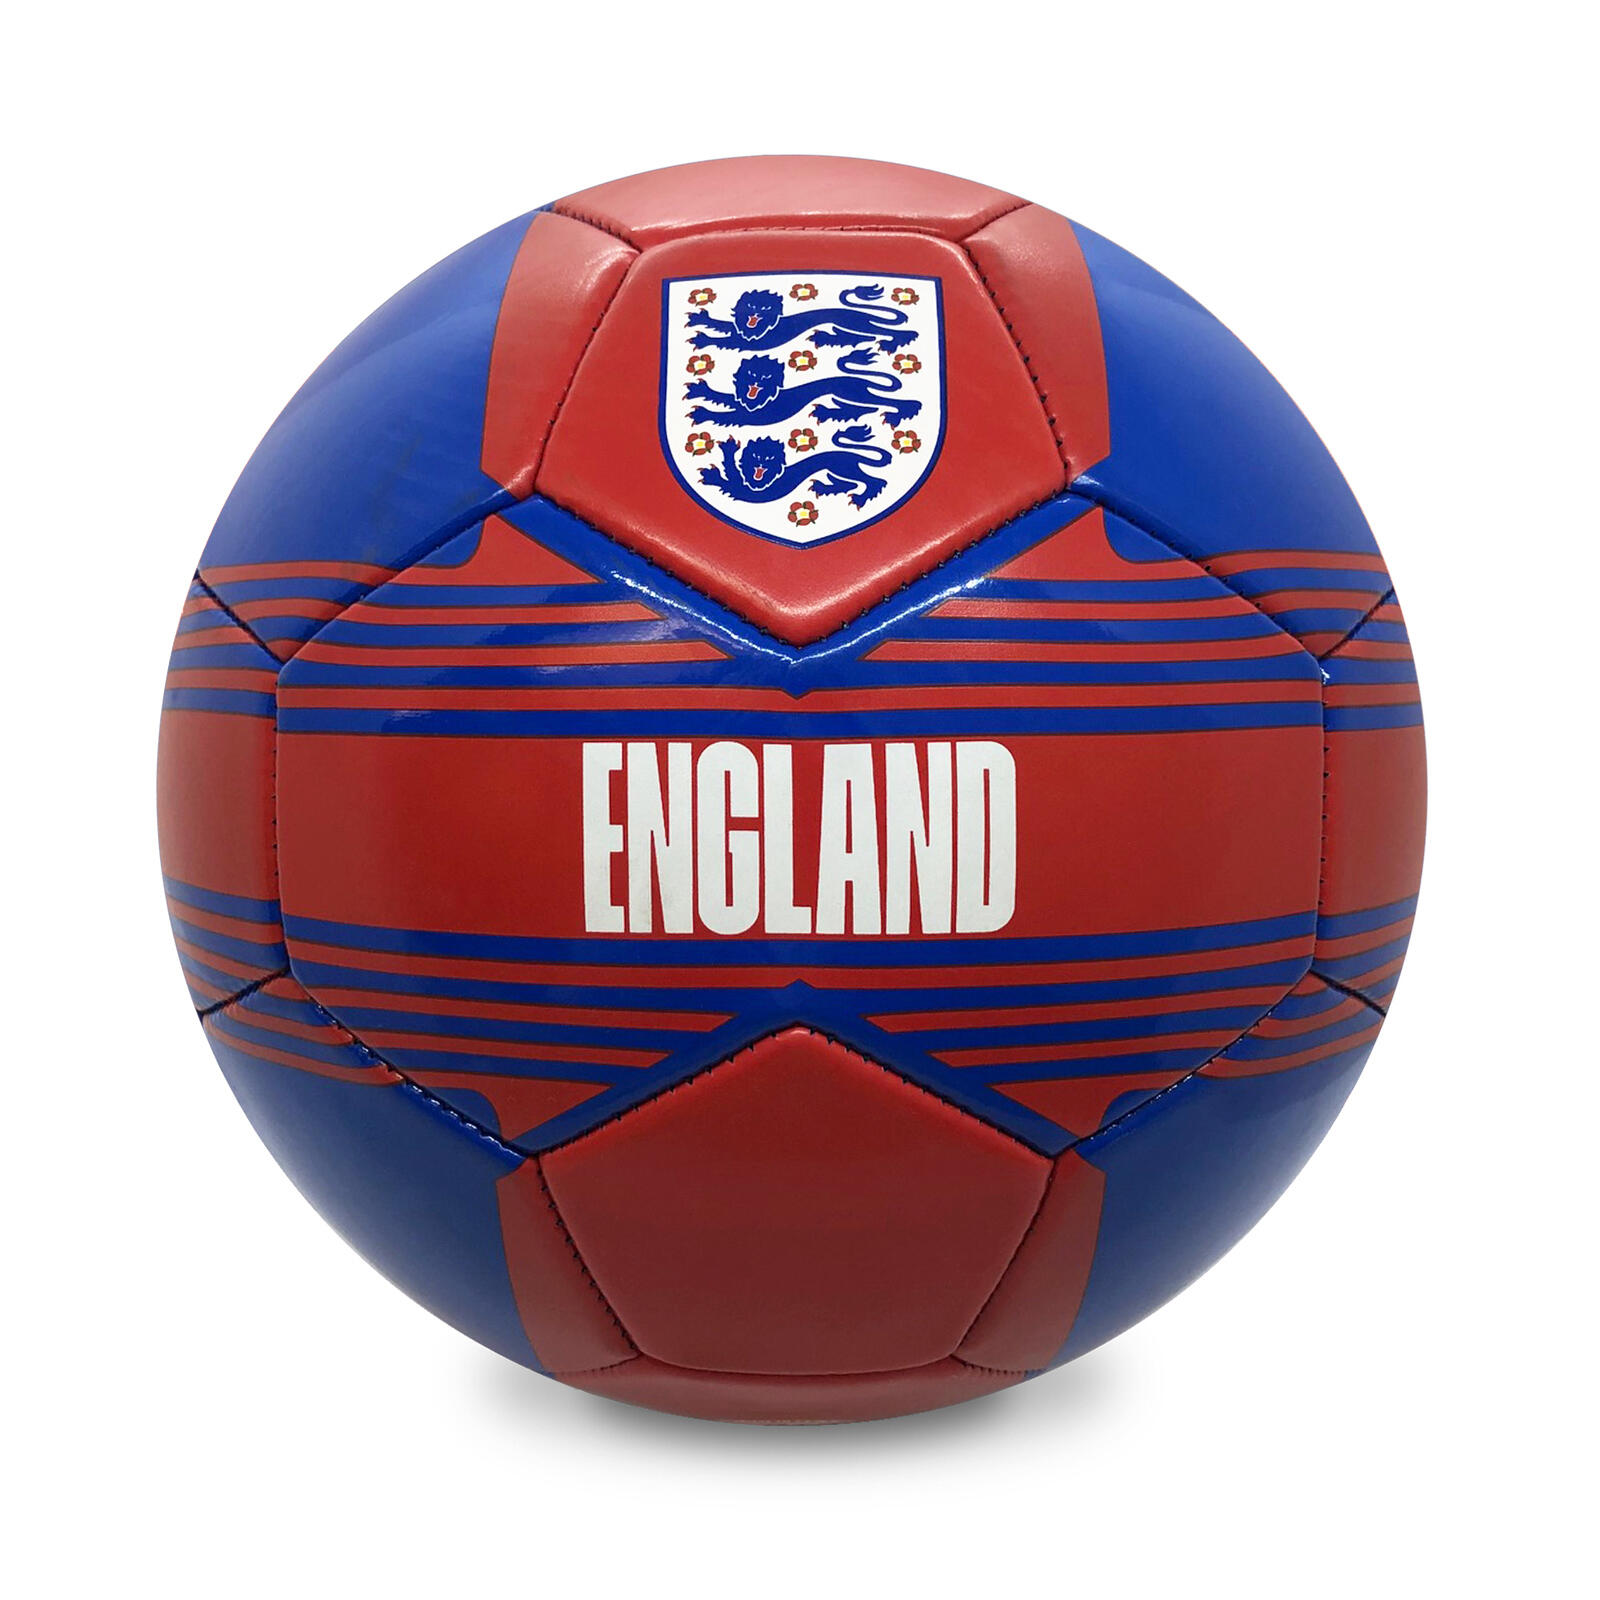 England Football Size 4 Crest Red OFFICIAL Gift 1/2